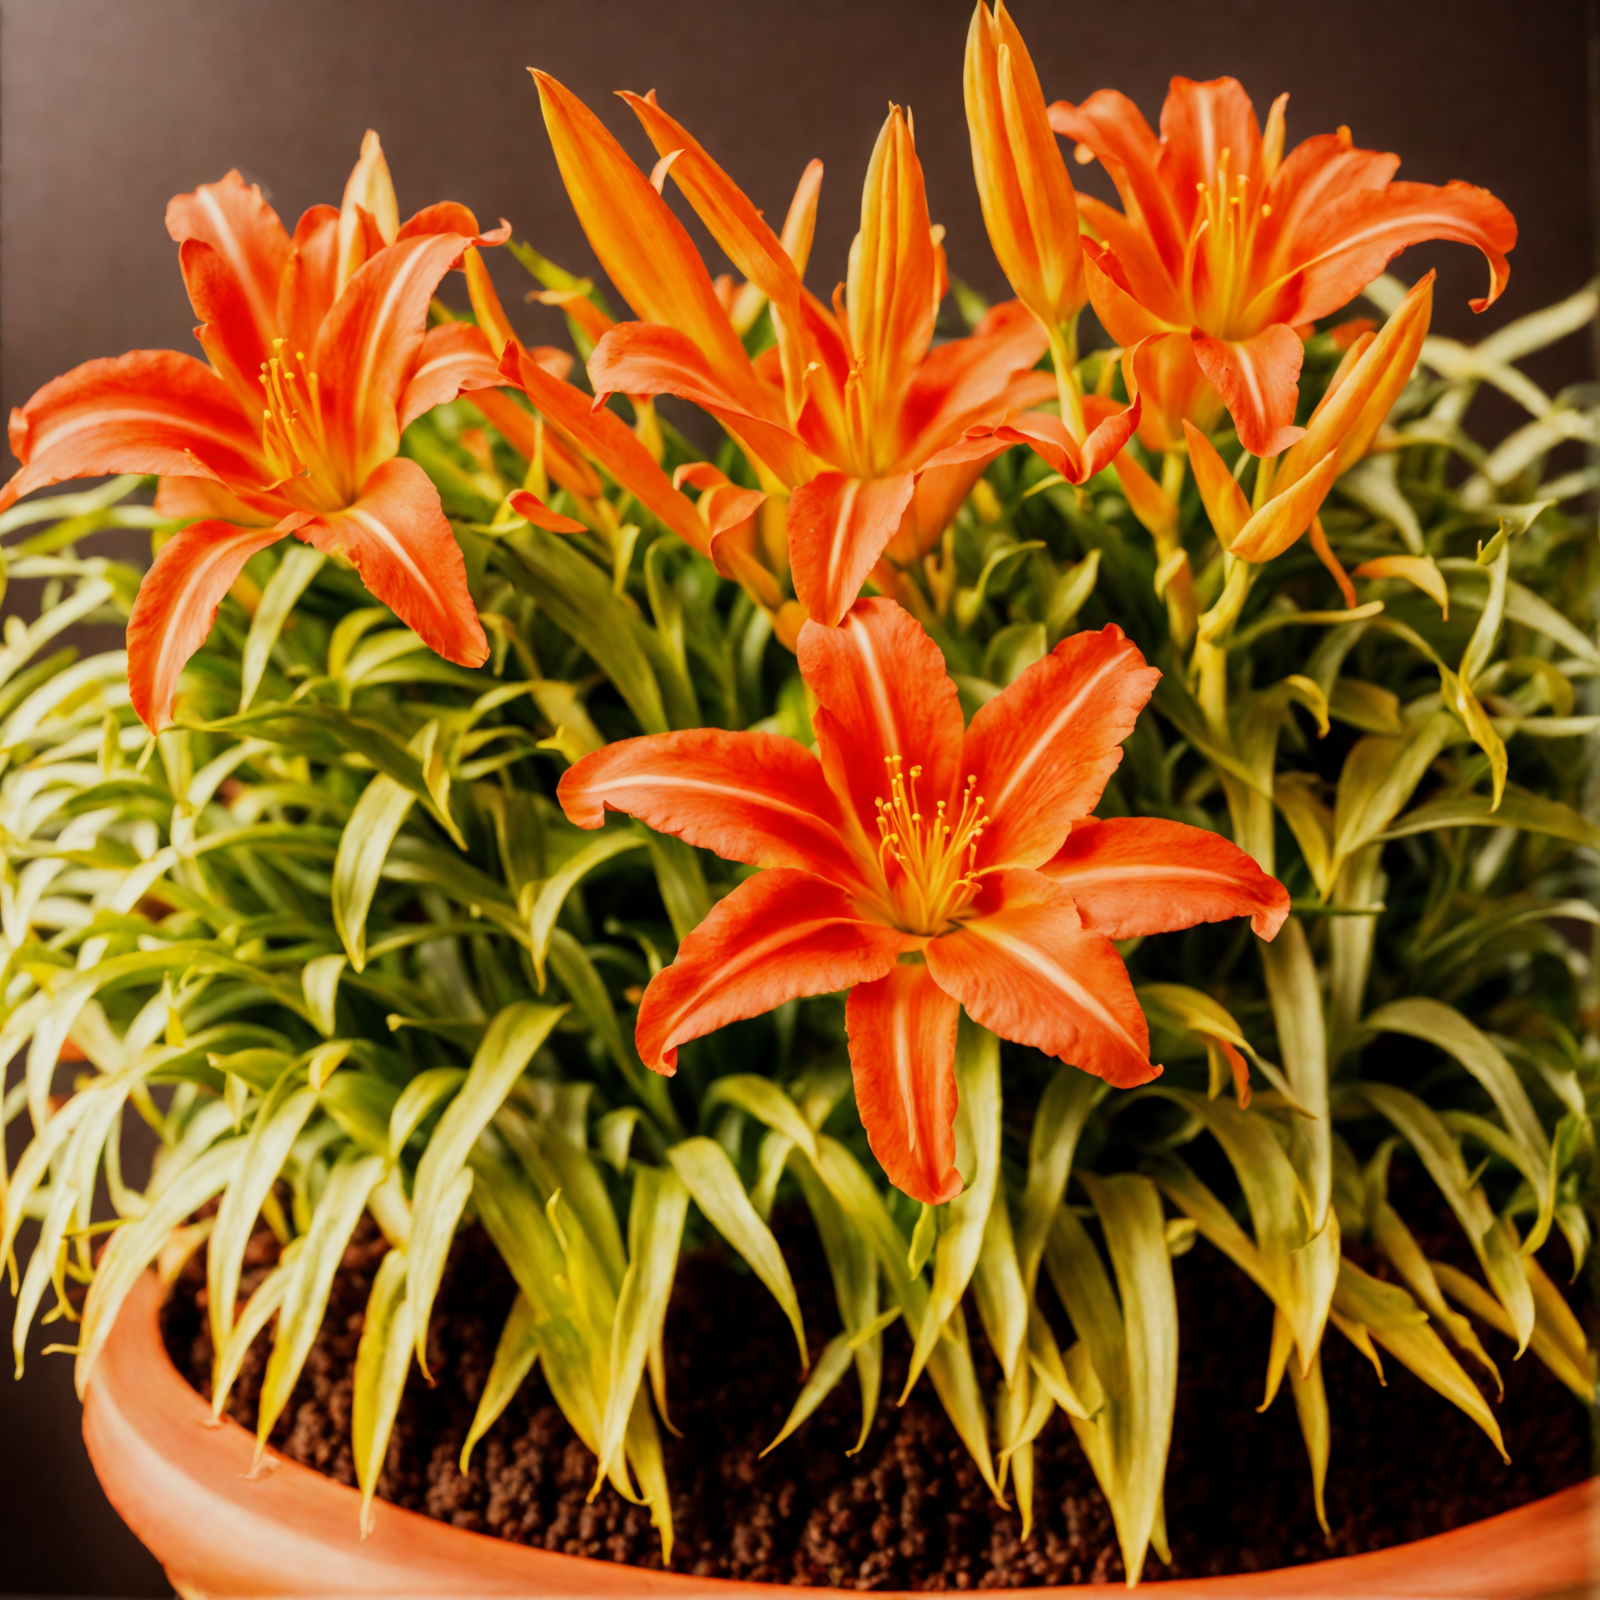 Hemerocallis fulva, or orange daylilies, arranged in a bowl as indoor decor, with clear lighting and a dark background.